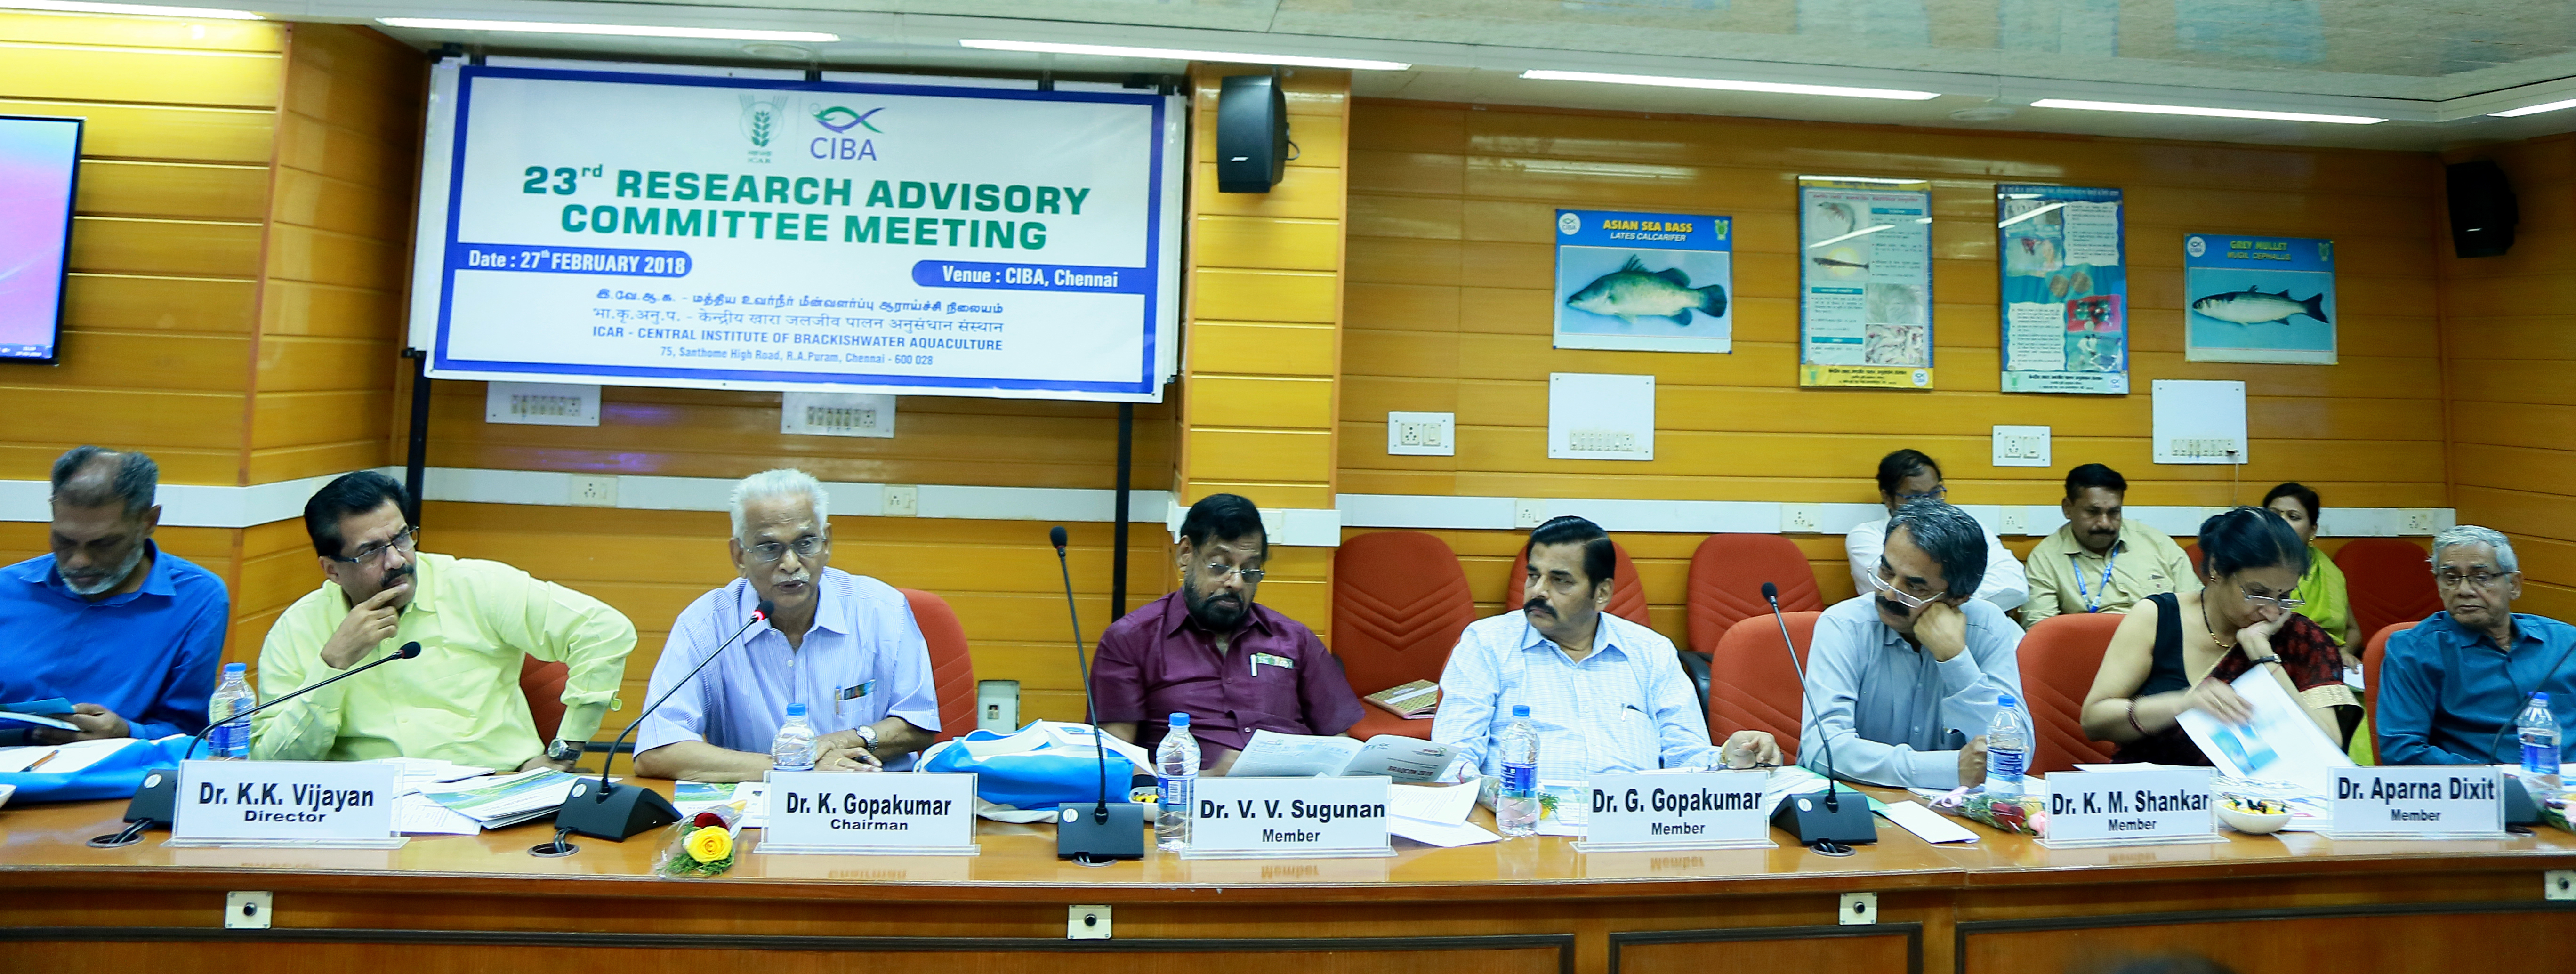 The 23rd Research Advisory Committee meeting of ICAR-CIBA was convened on 27th February 2018